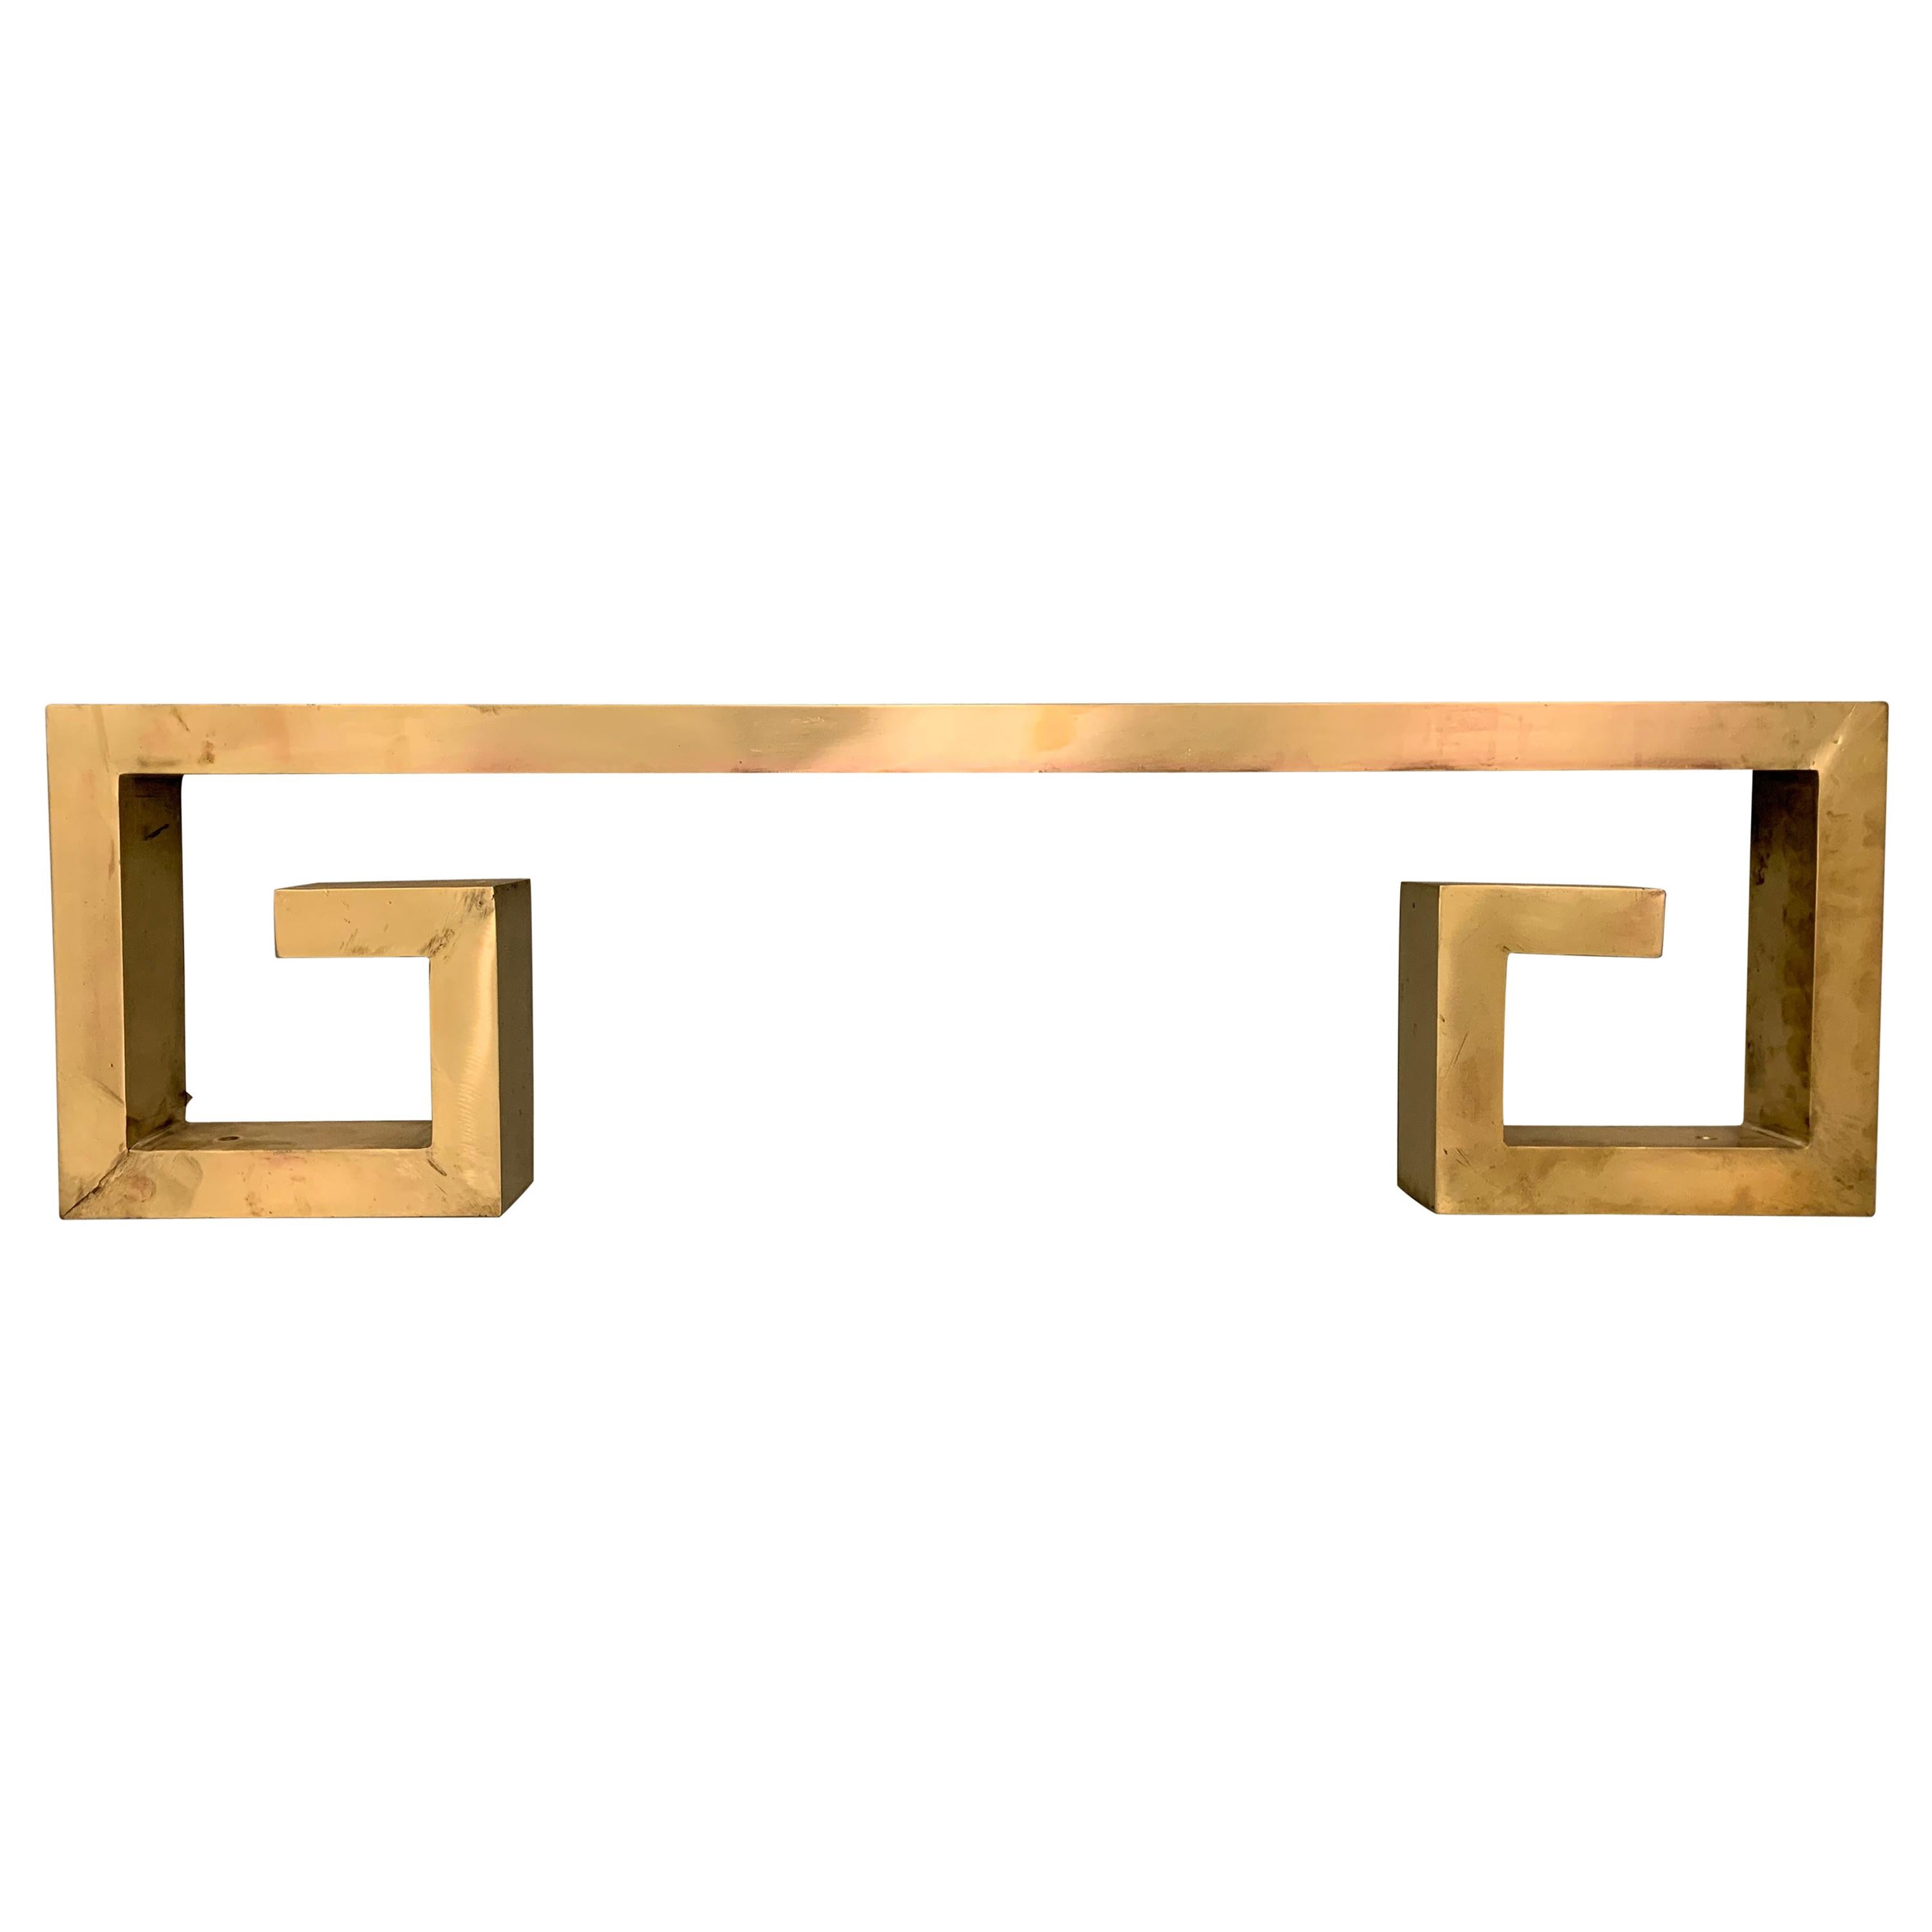 1940s Brass Greek Key Architectural Element For Sale